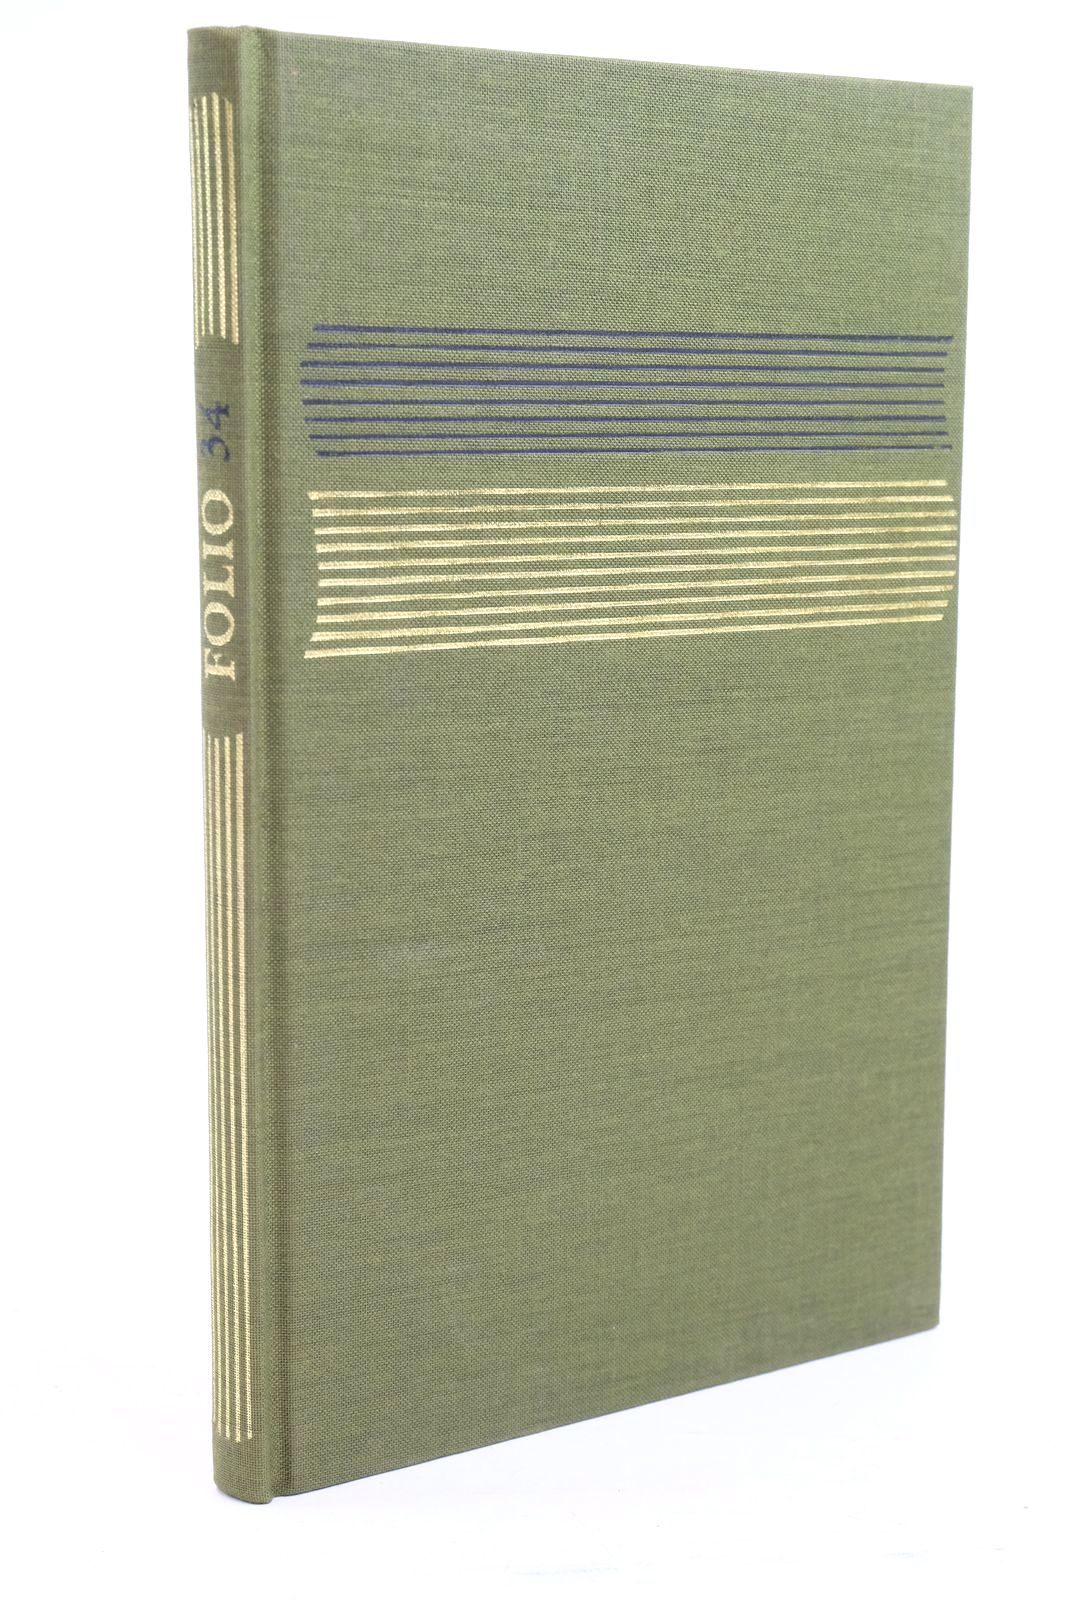 Photo of FOLIO 34 written by Dreyfus, John Letts, John published by Folio Press (STOCK CODE: 1320926)  for sale by Stella & Rose's Books